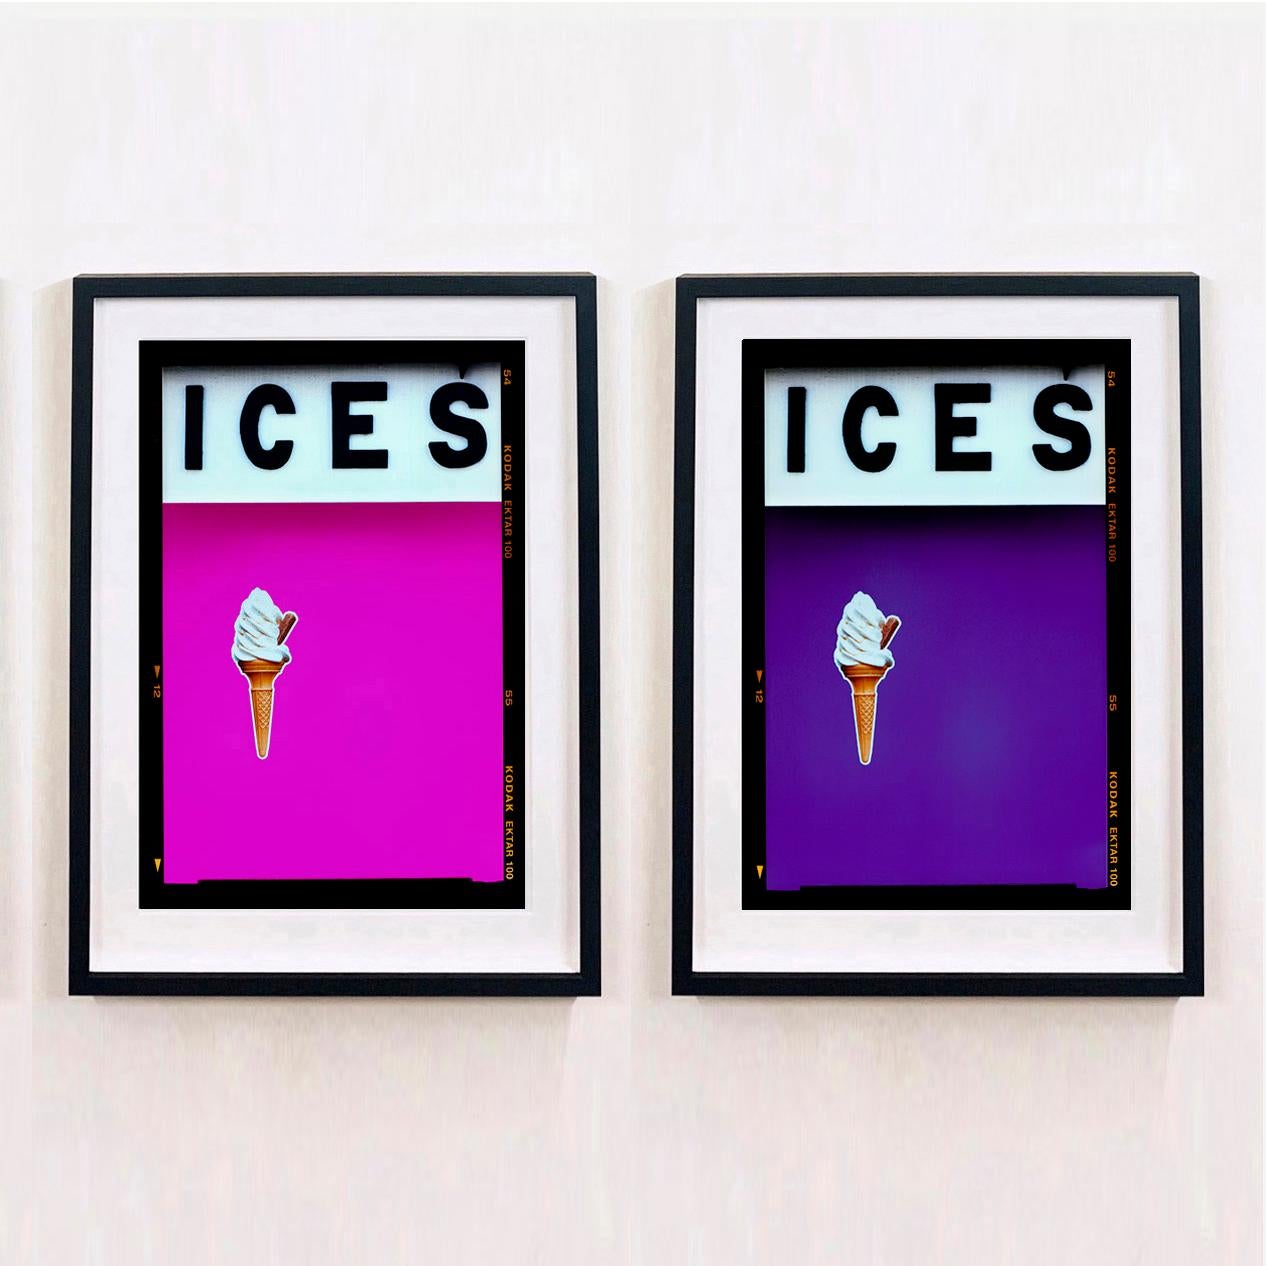 ICES, by Richard Heeps, photographed at the British Seaside at the end of summer 2020. This artwork is about evoking memories of the simple joy of days by the beach. The purple color blocking, typography and the surreal twist of the suspended ice